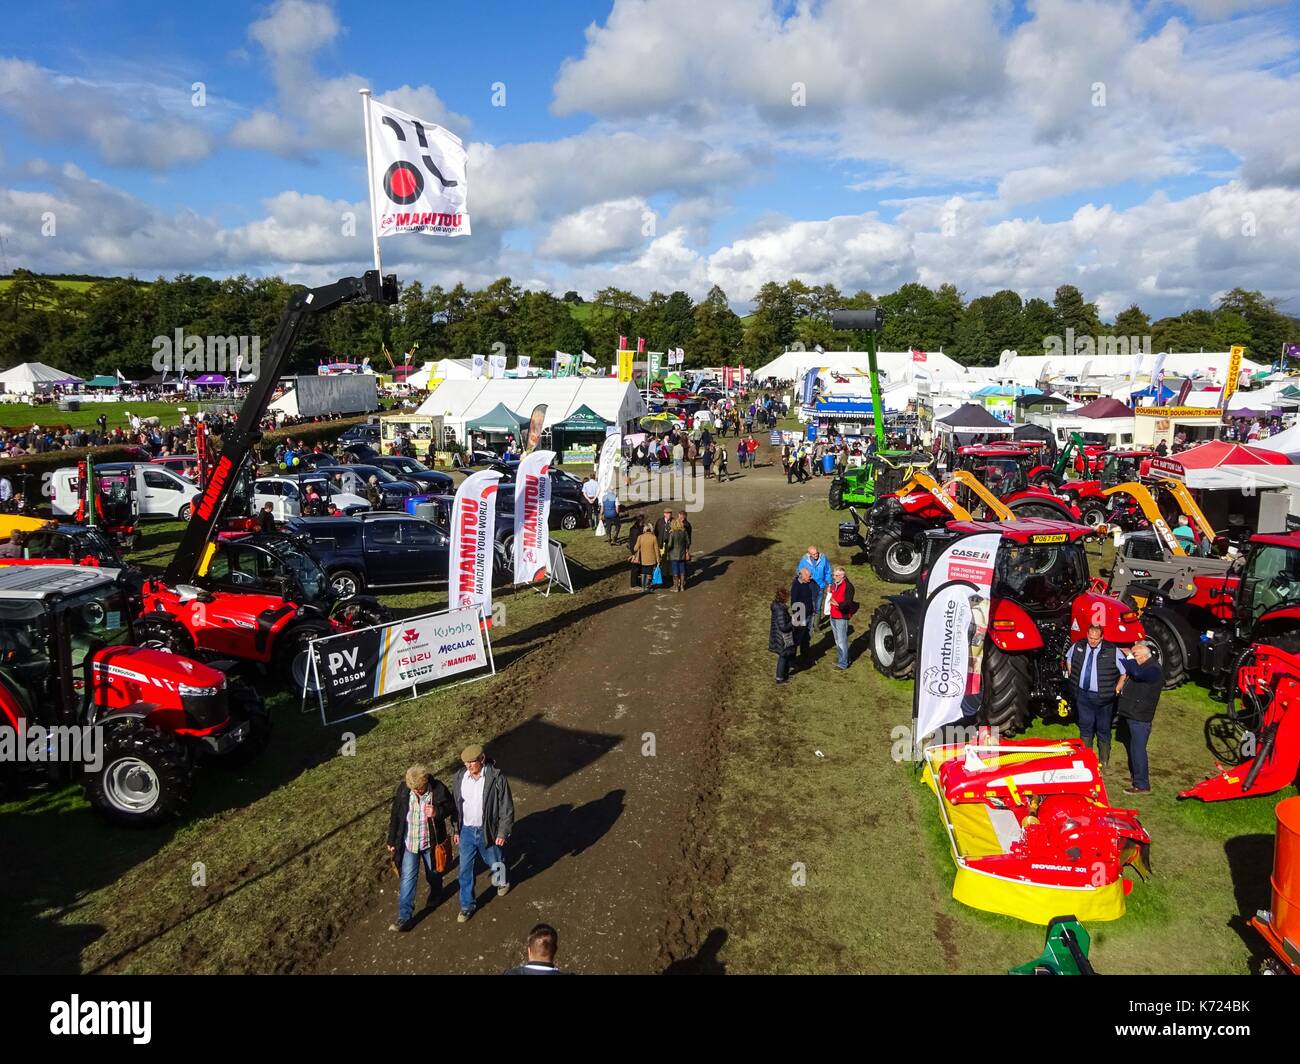 Cumbria, UK. 14th Sep, 2017. Aerial views of the Westmorland County Show in Cumbria. It is the 218th show that started in 1799. Glorious sunshine met the thousands of visitors to the annual event at the showground close to the M6. Various attractions included food halls, crafts, farm vehicles, animal shows and horse riding. Pic taken 14/09/2017. Credit: Michael Scott/Alamy Live News Stock Photo